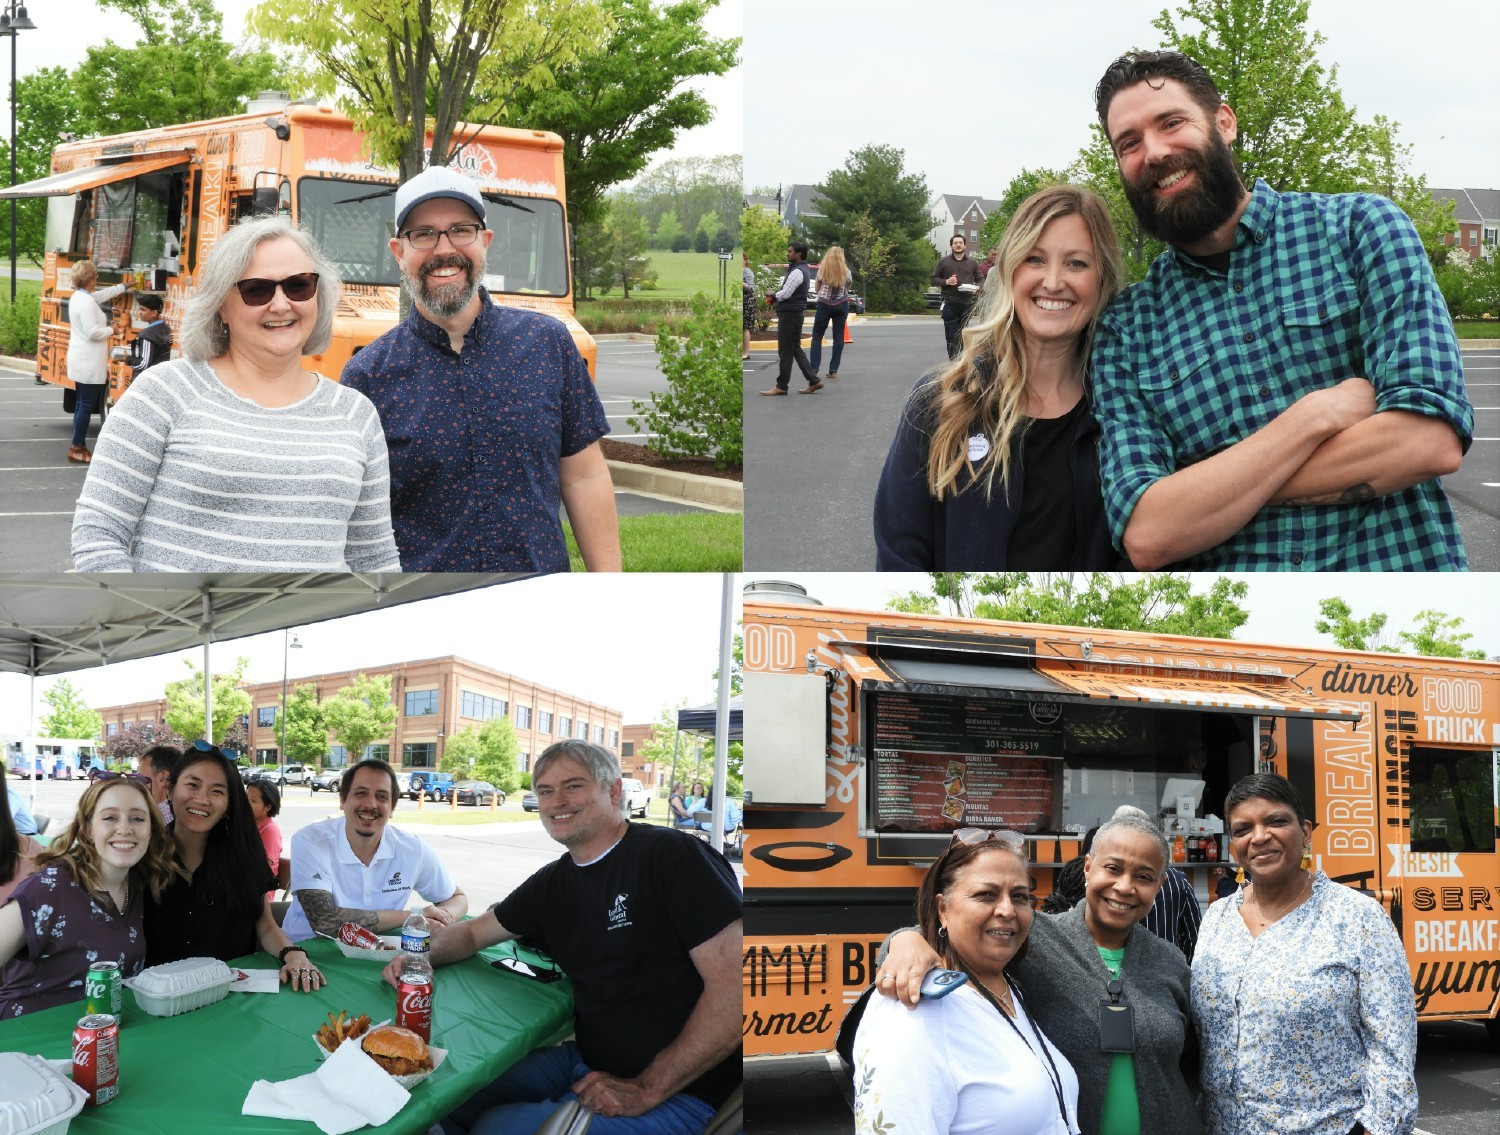 Enjoying some time to connect with colleagues as the food trucks roll in! 